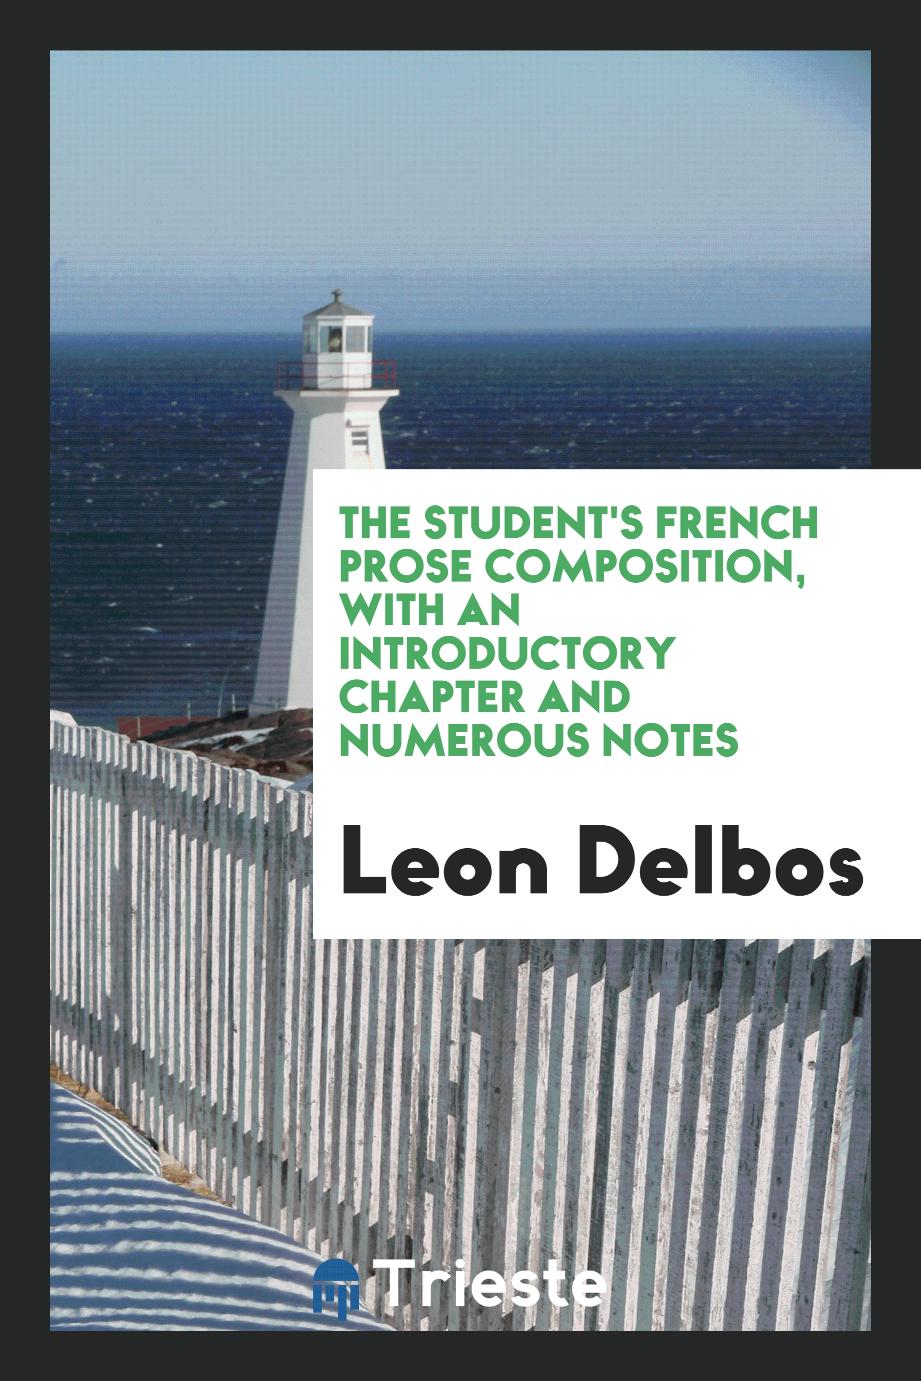 The student's French prose composition, with an introductory chapter and numerous notes